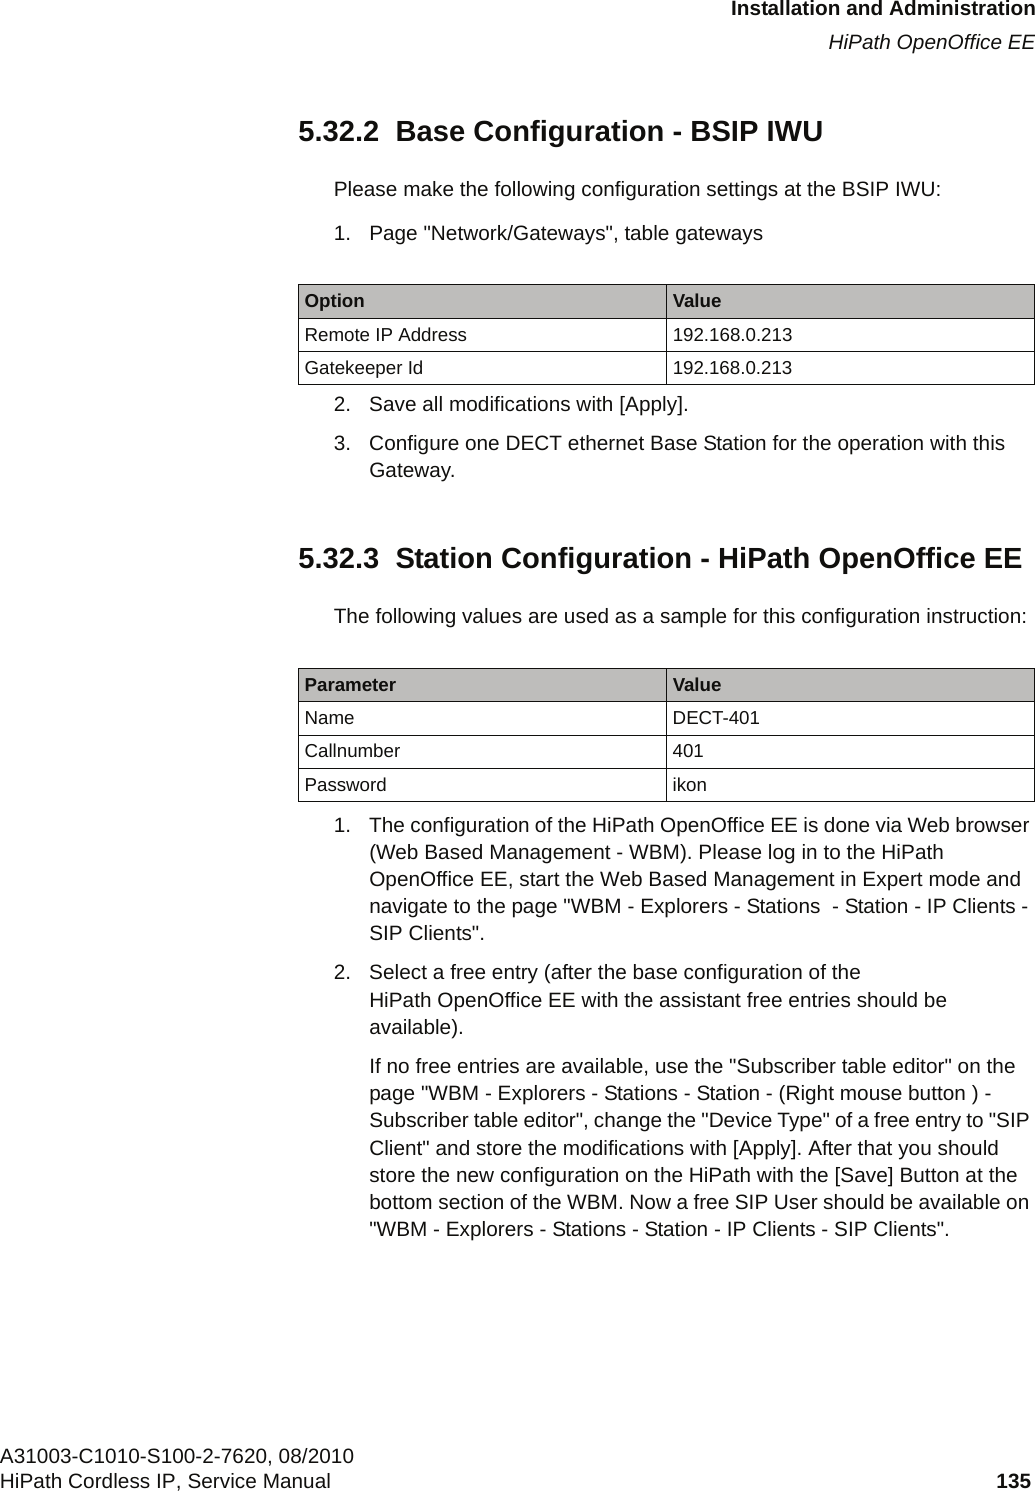 c05_ikon.fmInstallation and AdministrationHiPath OpenOffice EEA31003-C1010-S100-2-7620, 08/2010HiPath Cordless IP, Service Manual 135           5.32.2  Base Configuration - BSIP IWUPlease make the following configuration settings at the BSIP IWU:1. Page &quot;Network/Gateways&quot;, table gateways2. Save all modifications with [Apply].3. Configure one DECT ethernet Base Station for the operation with this Gateway.5.32.3  Station Configuration - HiPath OpenOffice EEThe following values are used as a sample for this configuration instruction:1. The configuration of the HiPath OpenOffice EE is done via Web browser (Web Based Management - WBM). Please log in to the HiPath OpenOffice EE, start the Web Based Management in Expert mode and navigate to the page &quot;WBM - Explorers - Stations  - Station - IP Clients - SIP Clients&quot;.2. Select a free entry (after the base configuration of the HiPath OpenOffice EE with the assistant free entries should be available).If no free entries are available, use the &quot;Subscriber table editor&quot; on the page &quot;WBM - Explorers - Stations - Station - (Right mouse button ) - Subscriber table editor&quot;, change the &quot;Device Type&quot; of a free entry to &quot;SIP Client&quot; and store the modifications with [Apply]. After that you should store the new configuration on the HiPath with the [Save] Button at the bottom section of the WBM. Now a free SIP User should be available on &quot;WBM - Explorers - Stations - Station - IP Clients - SIP Clients&quot;.Option ValueRemote IP Address 192.168.0.213Gatekeeper Id 192.168.0.213Parameter ValueName DECT-401Callnumber 401Password ikon